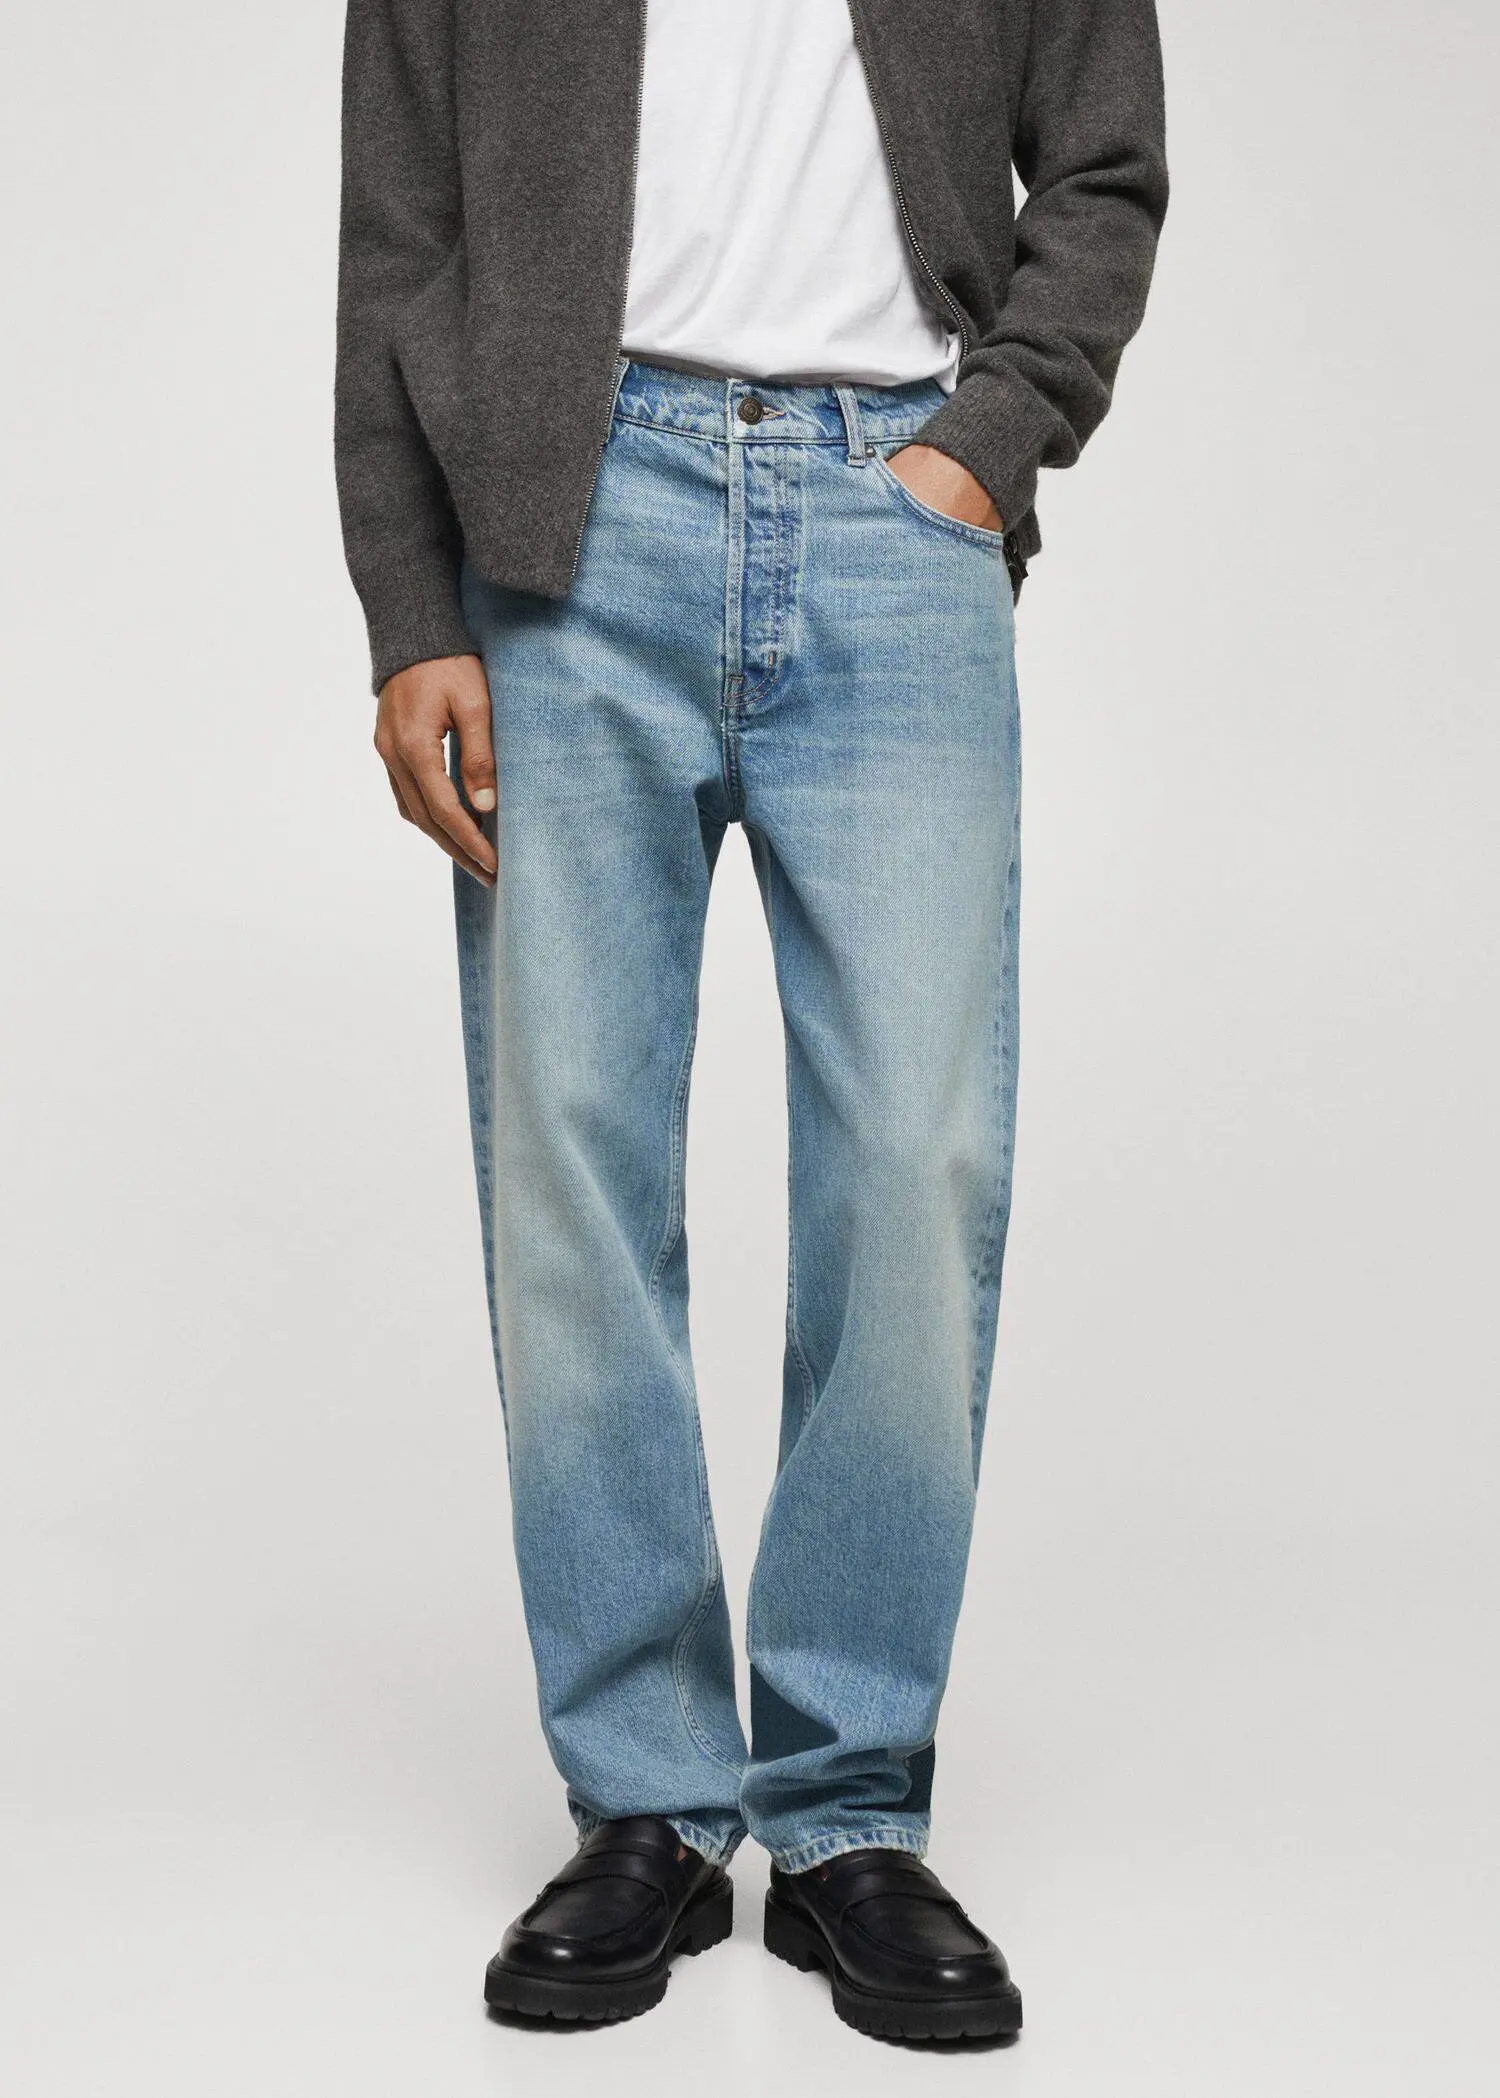 Mango Jeans relaxed-fit lavaggio medio. 1